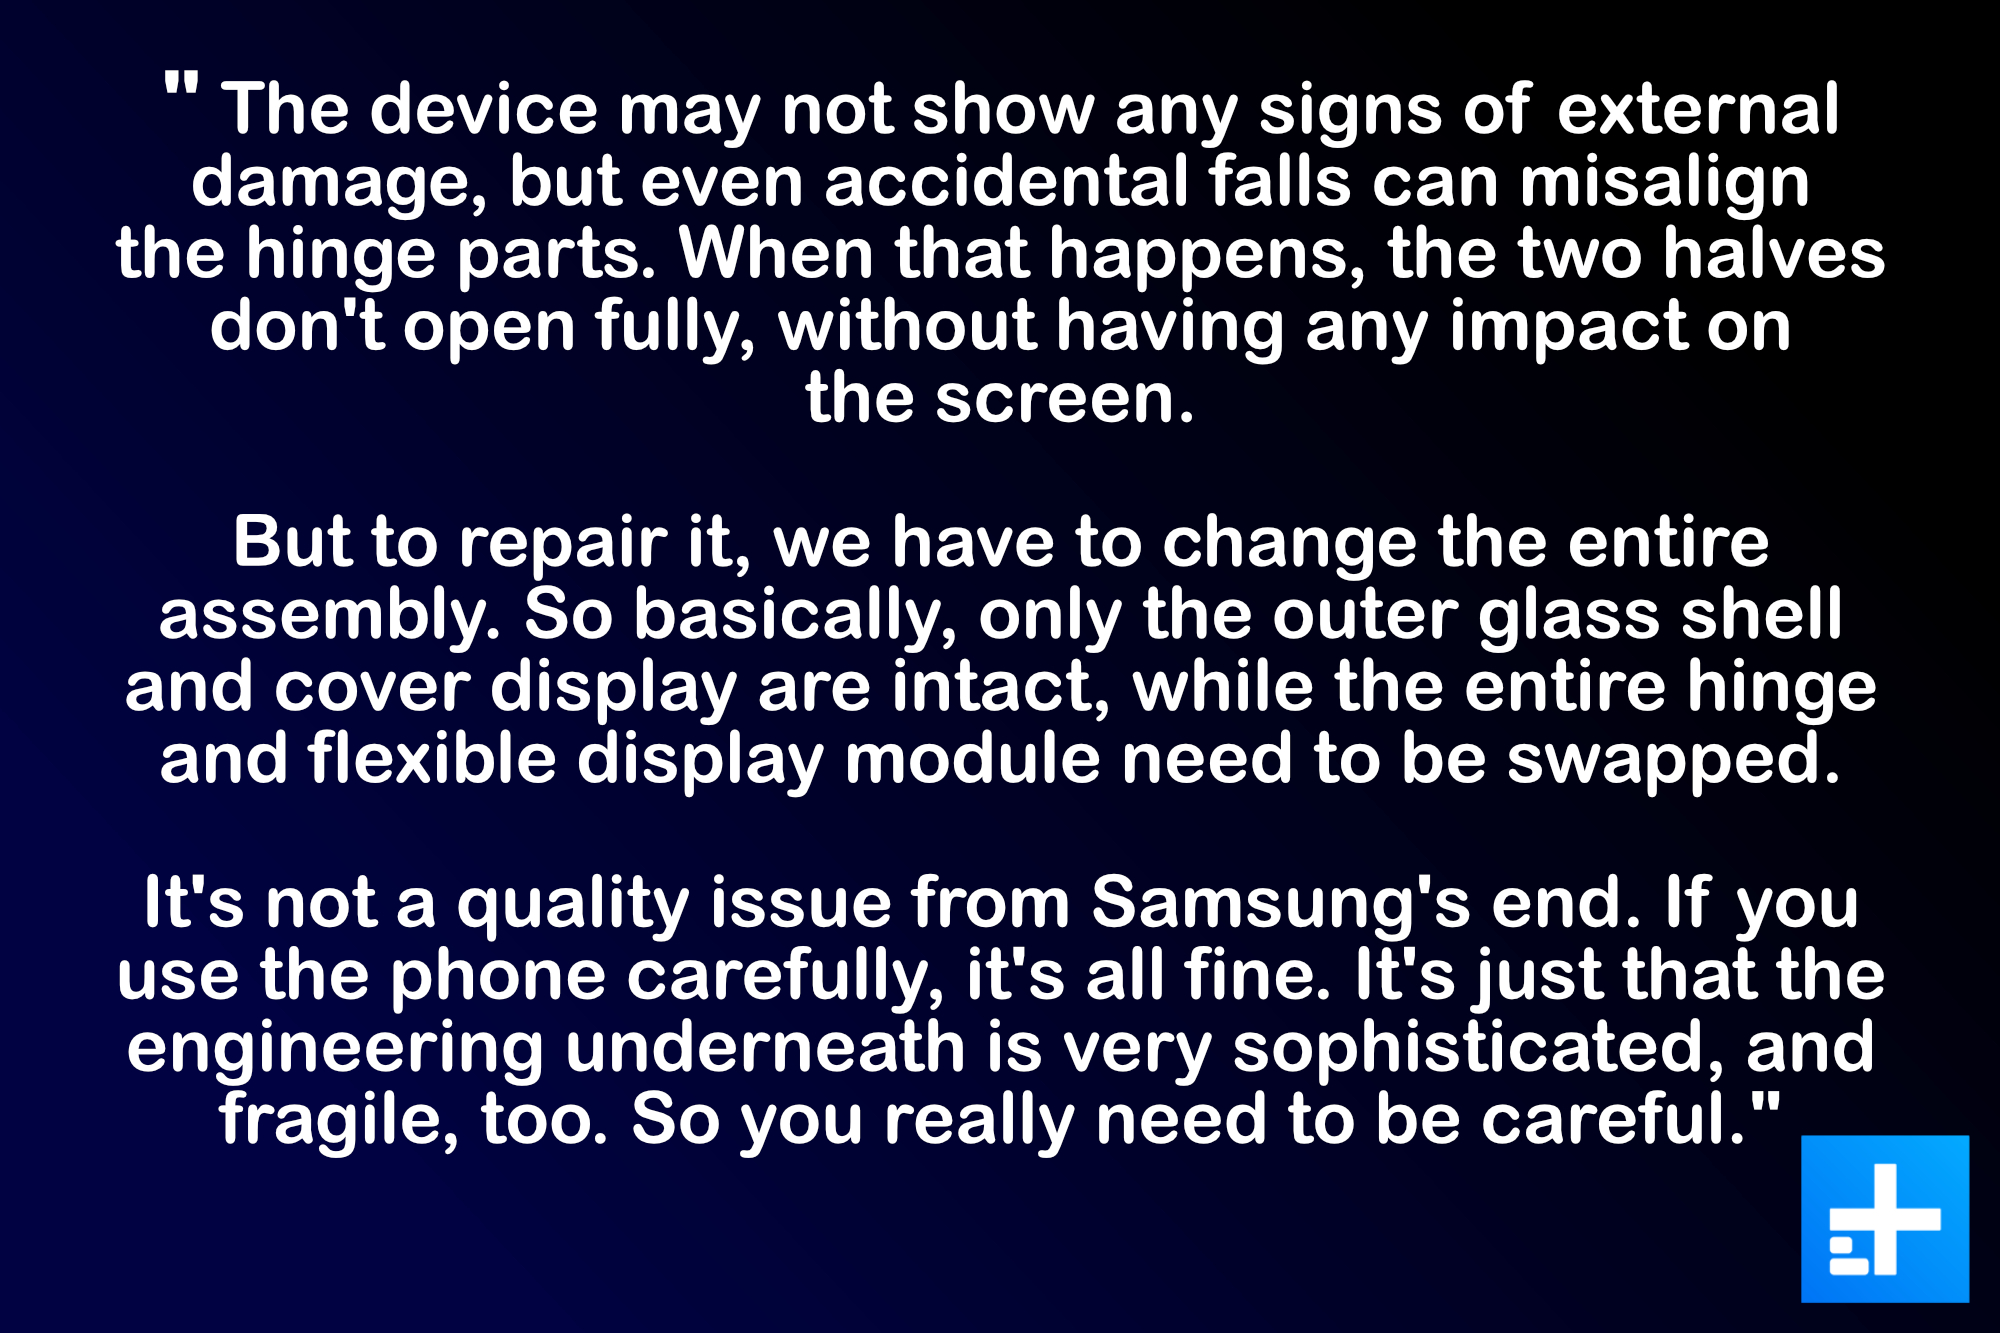 Comment about Samsung foldable phones from an expert at authorized service outlet.